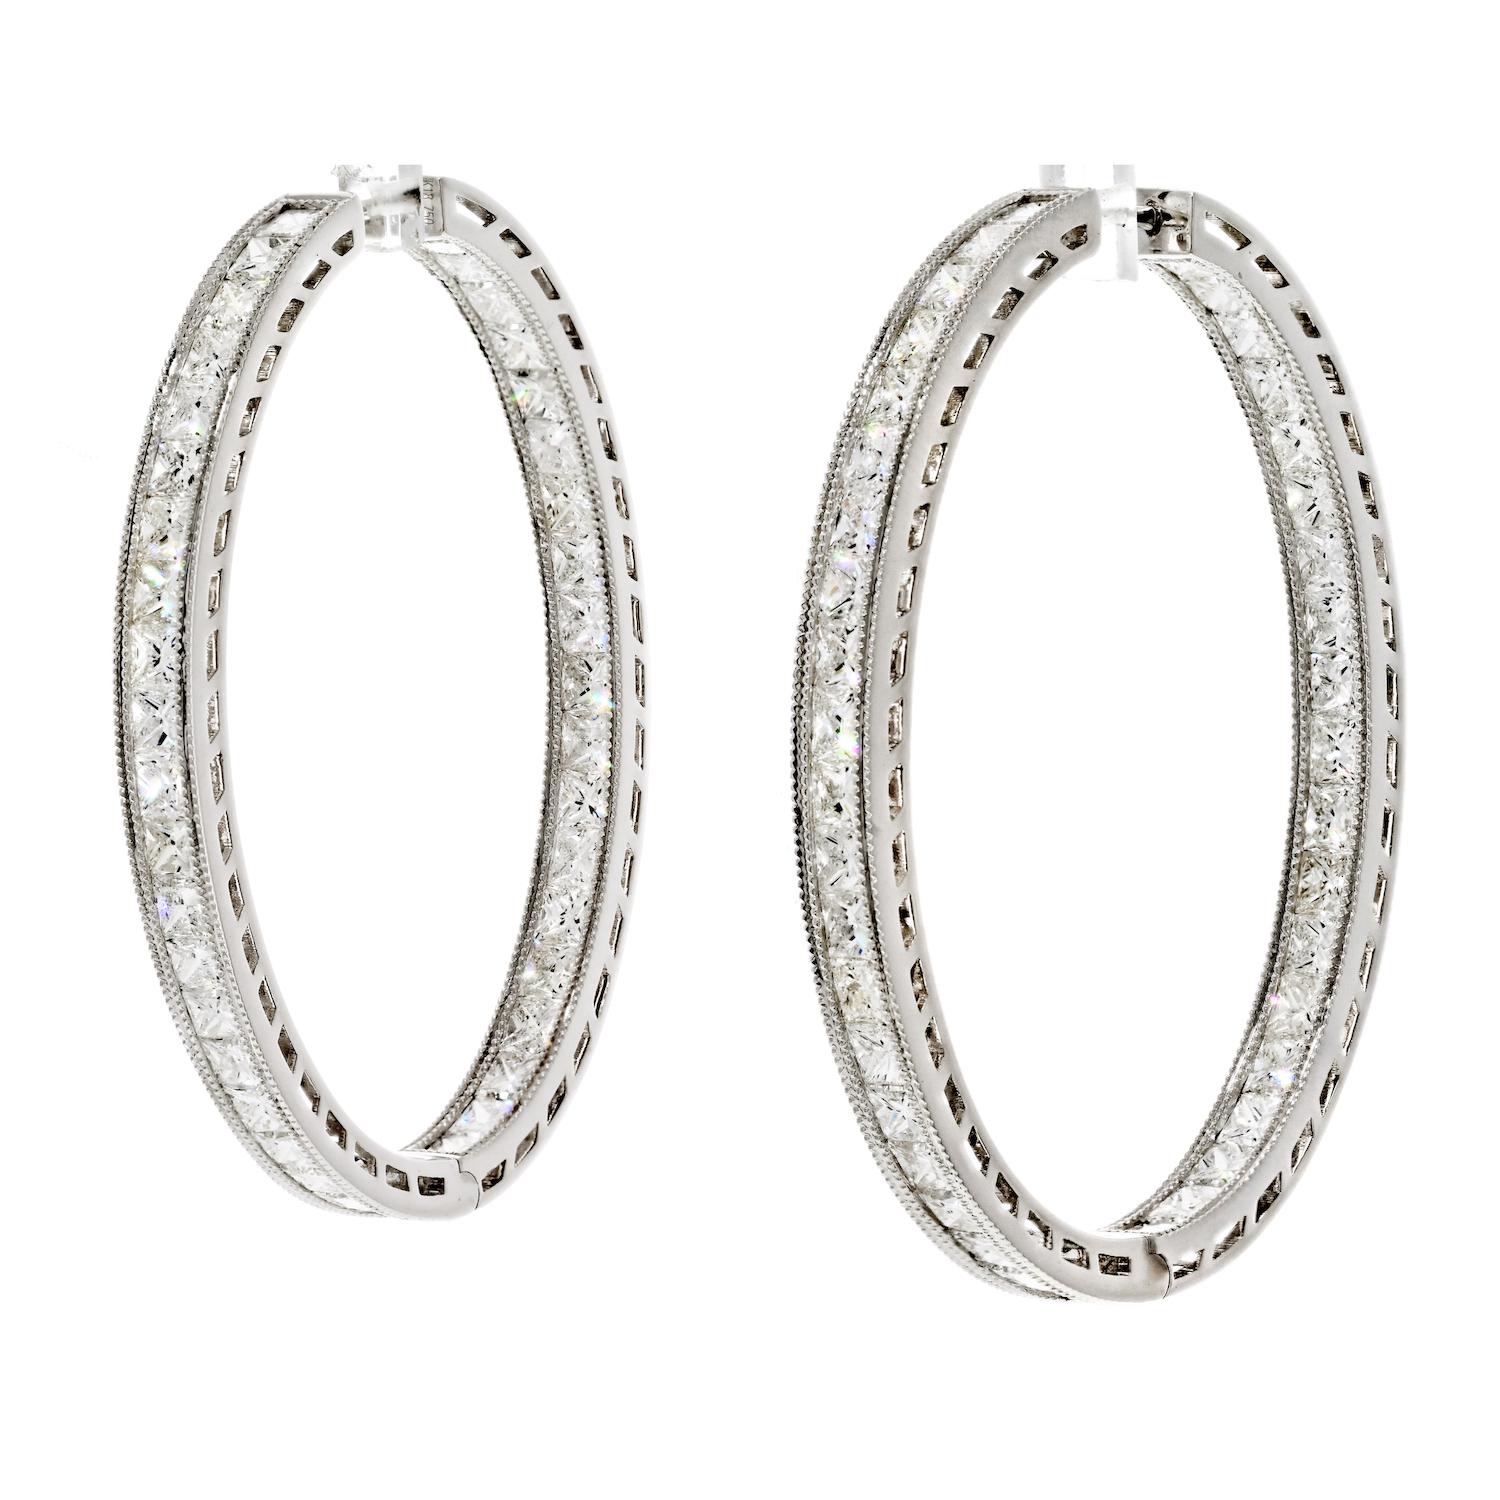 The 18K White Gold 12.87cttw Princess Cut Diamond Inside Out Hoop Earrings are a dazzling and luxurious accessory that exude elegance and style. These hoop earrings feature a stunning display of diamonds, mounted both inside and out, in a channel